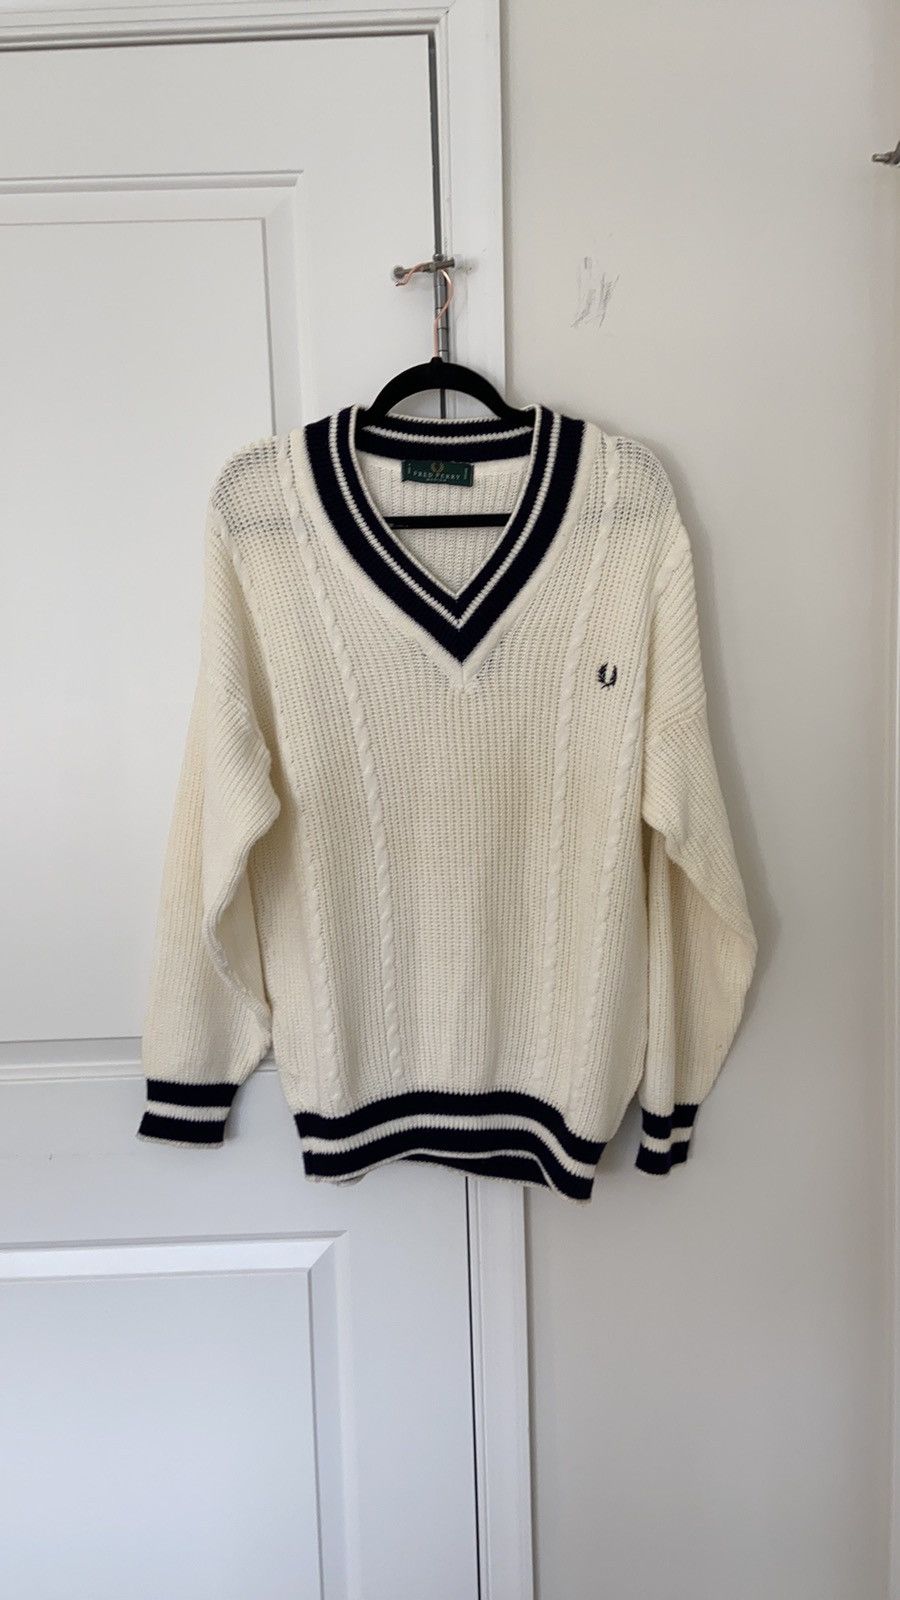 Fred Perry Fred Perry Varsity Tilden Knit Sweater | Grailed